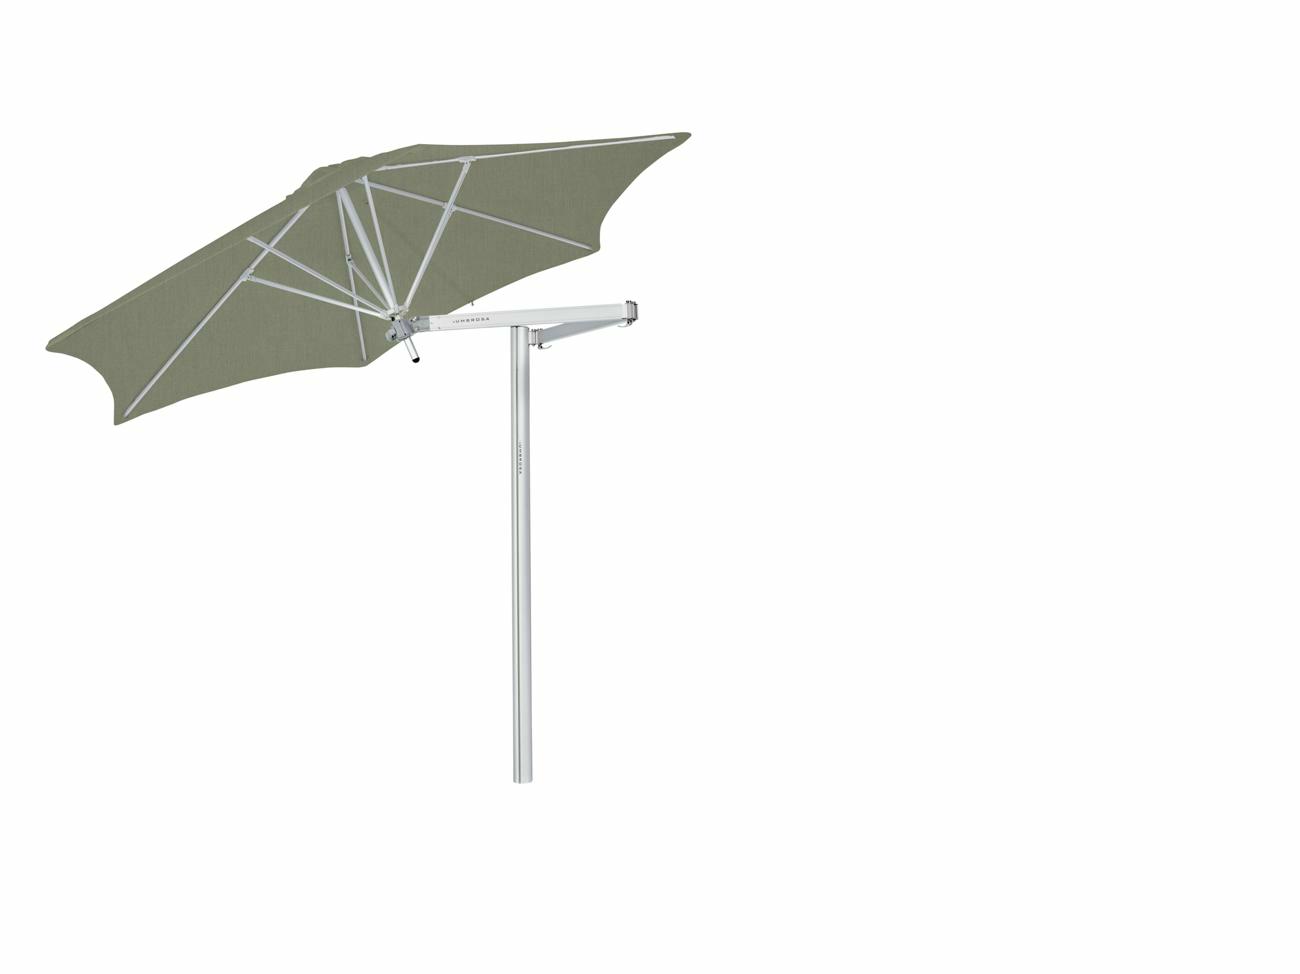 Paraflex cantilever umbrella round 2,7 m with Almond fabric and a Classic arm